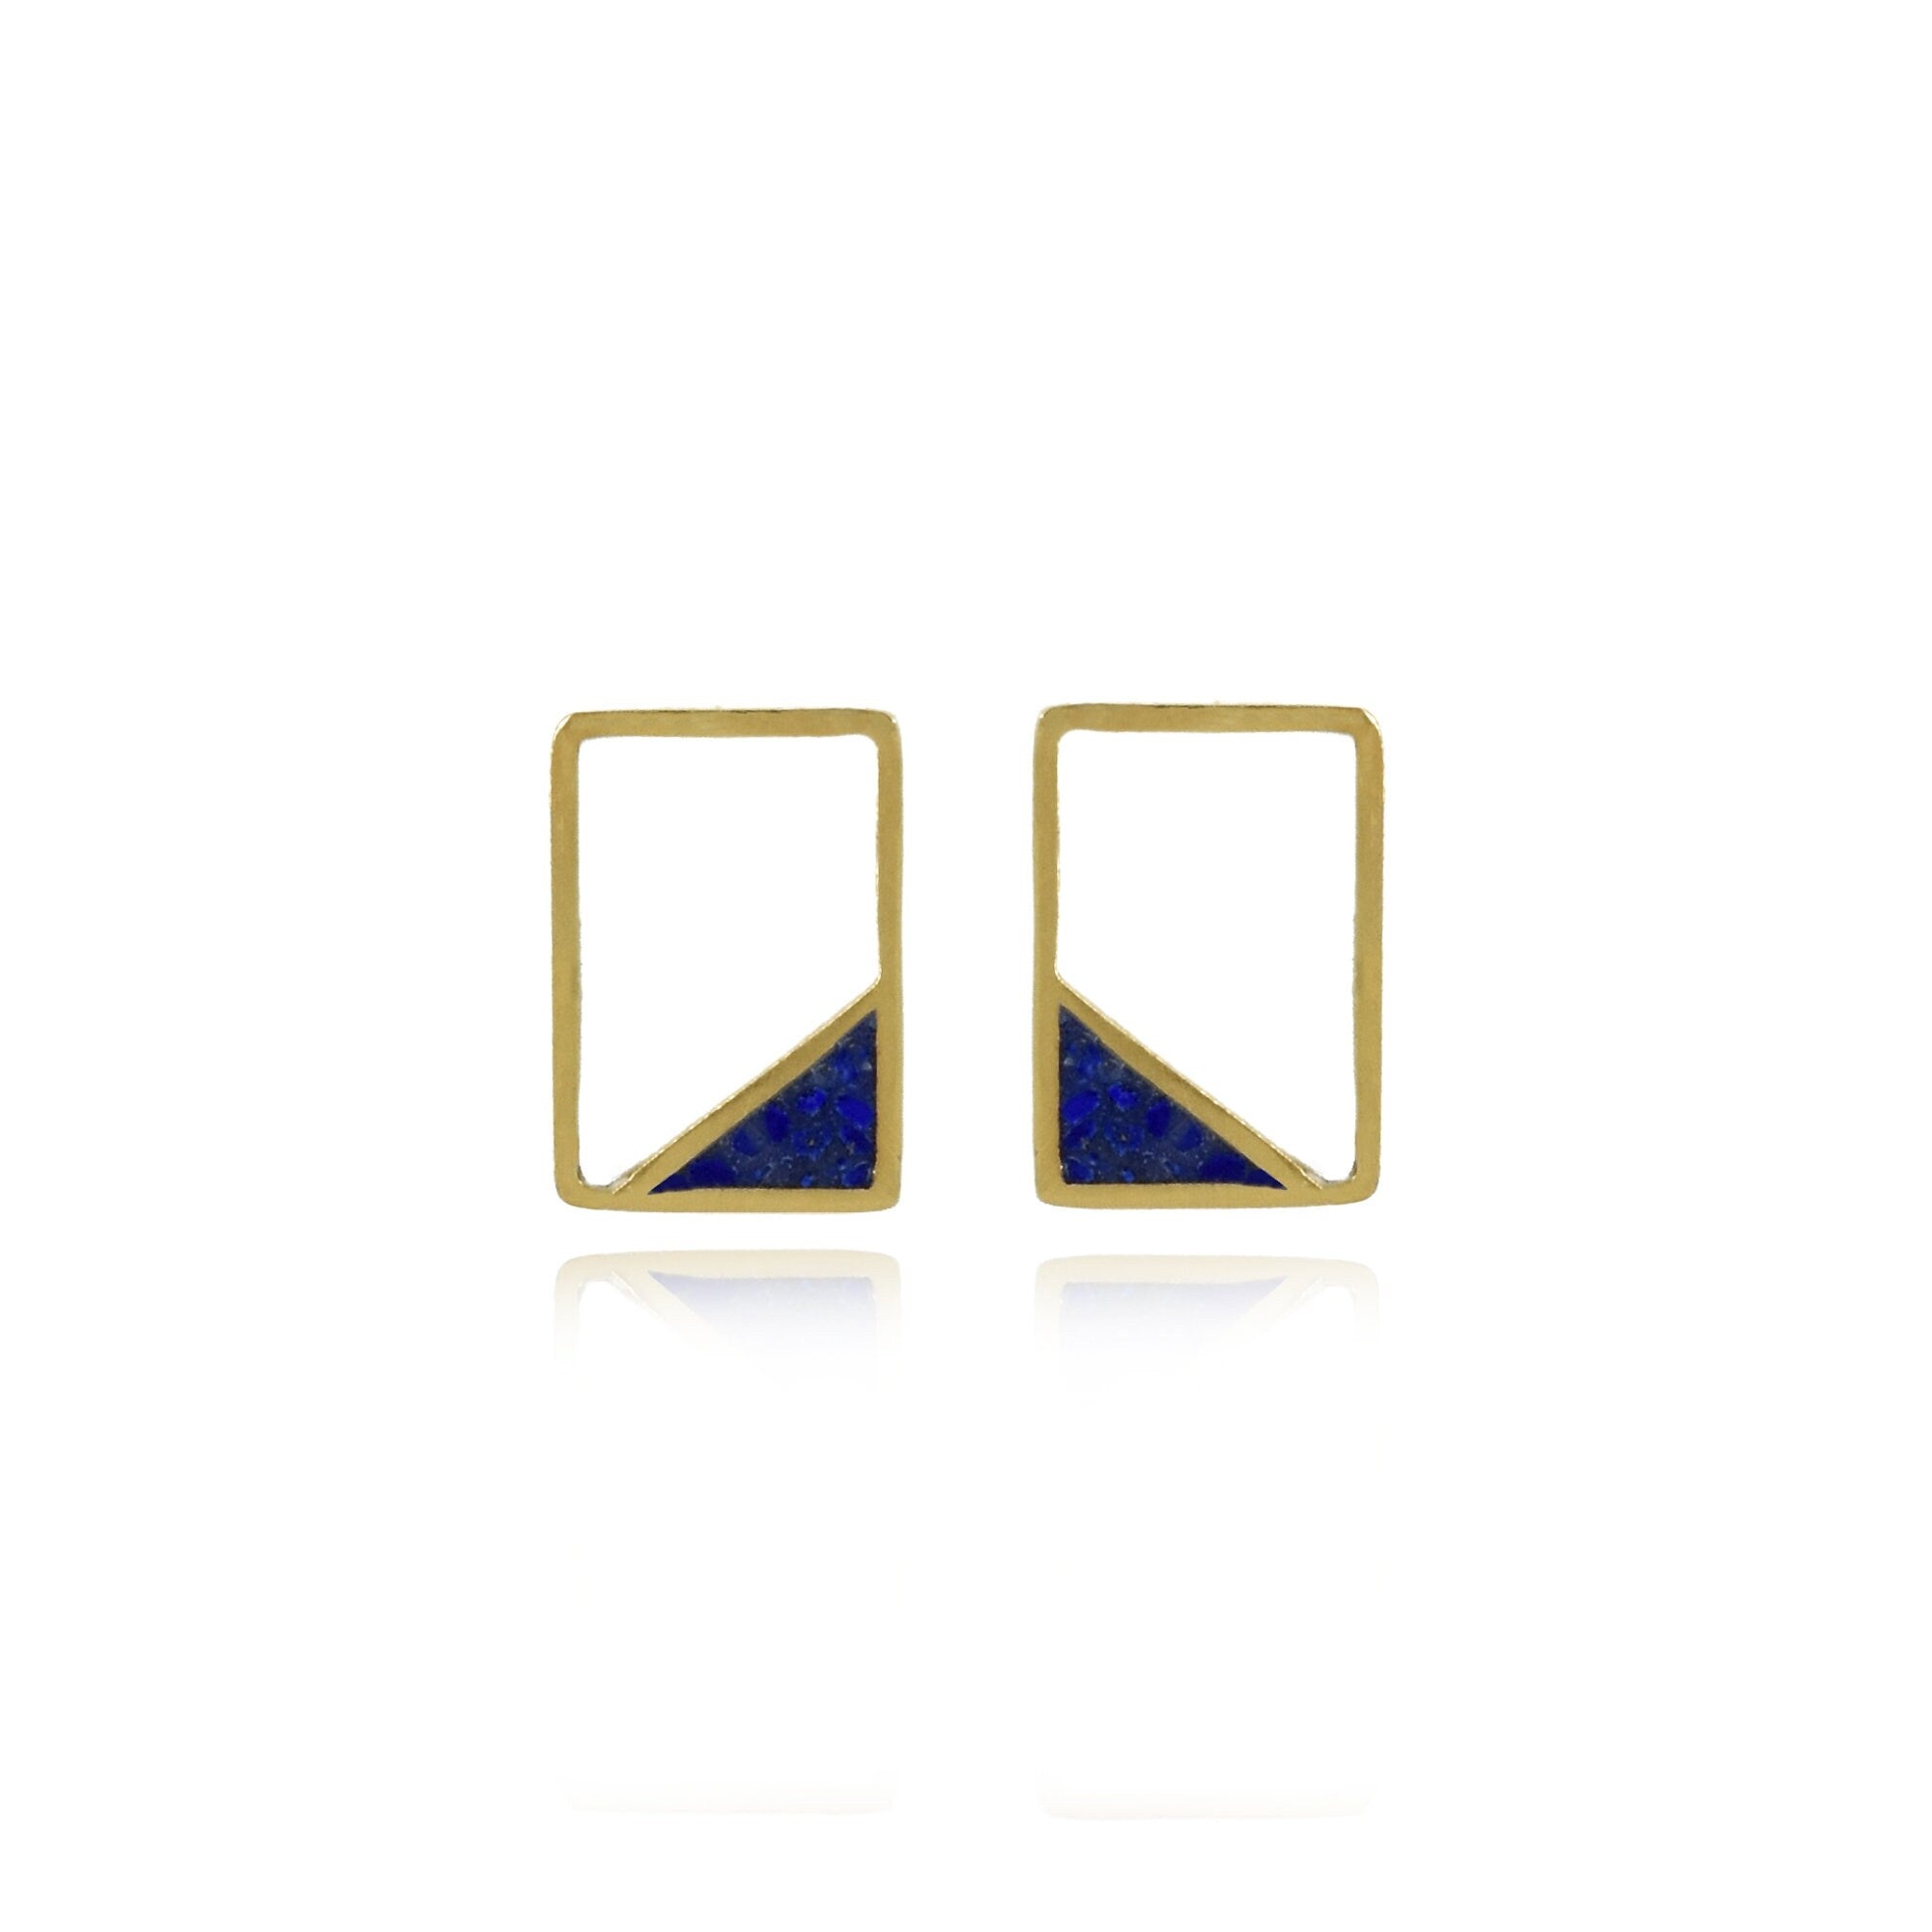 Handmade Afghan Blue Gemstone Lapis Lazuli Stud Frame Earrings Gold Brass Elegant Inspired Jewelry Nature Square Abstract Gift for Her